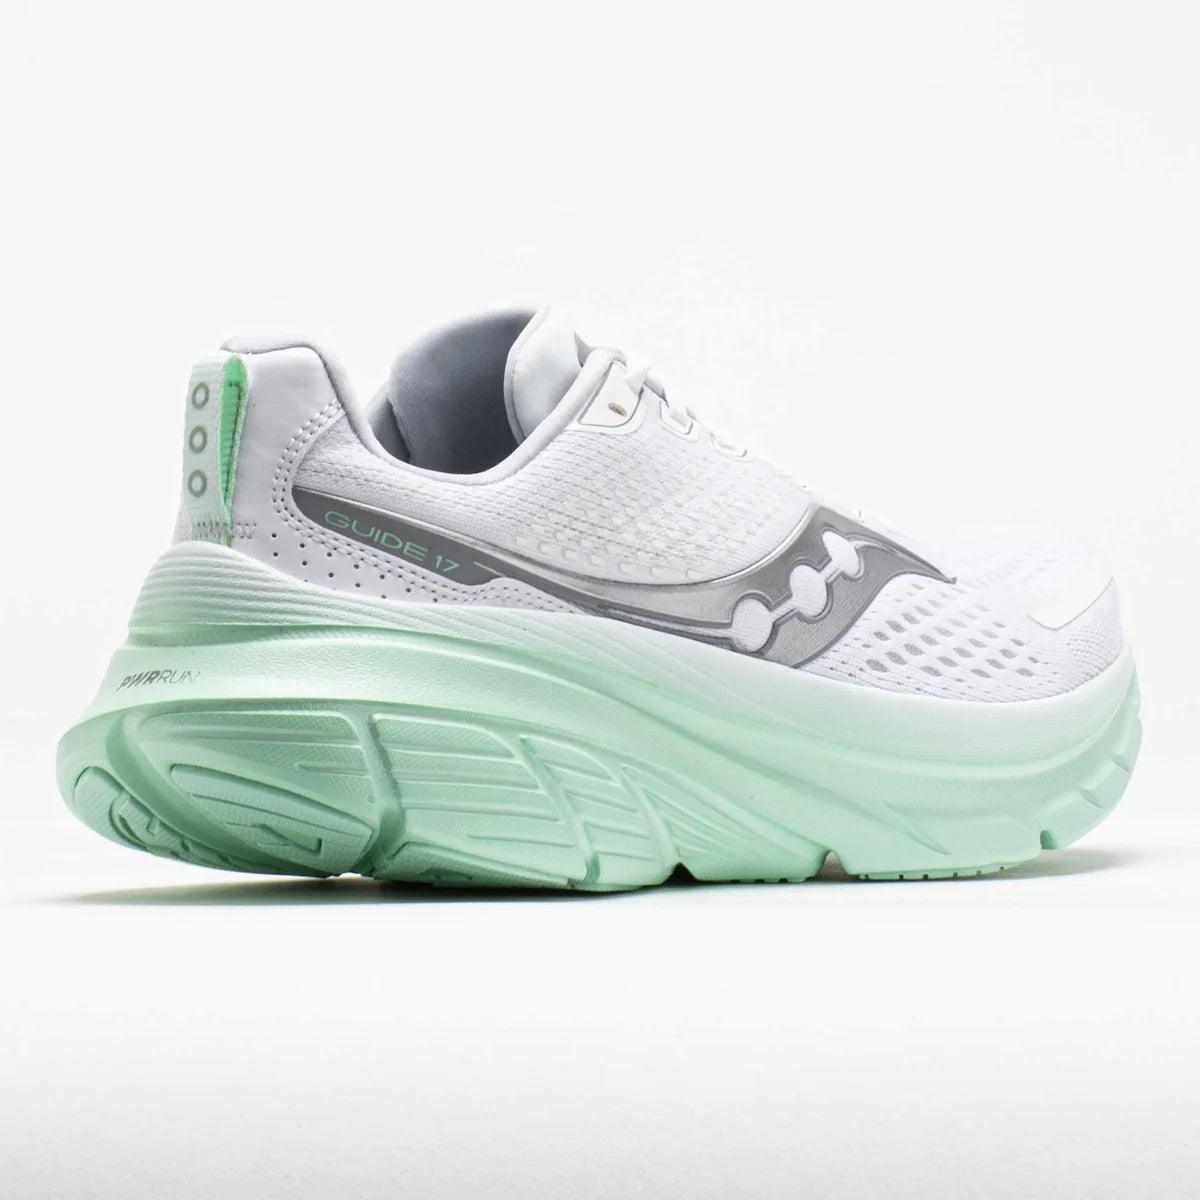 Saucony - Saucony Women's Guide 17 Running Shoe - The Shoe Collective